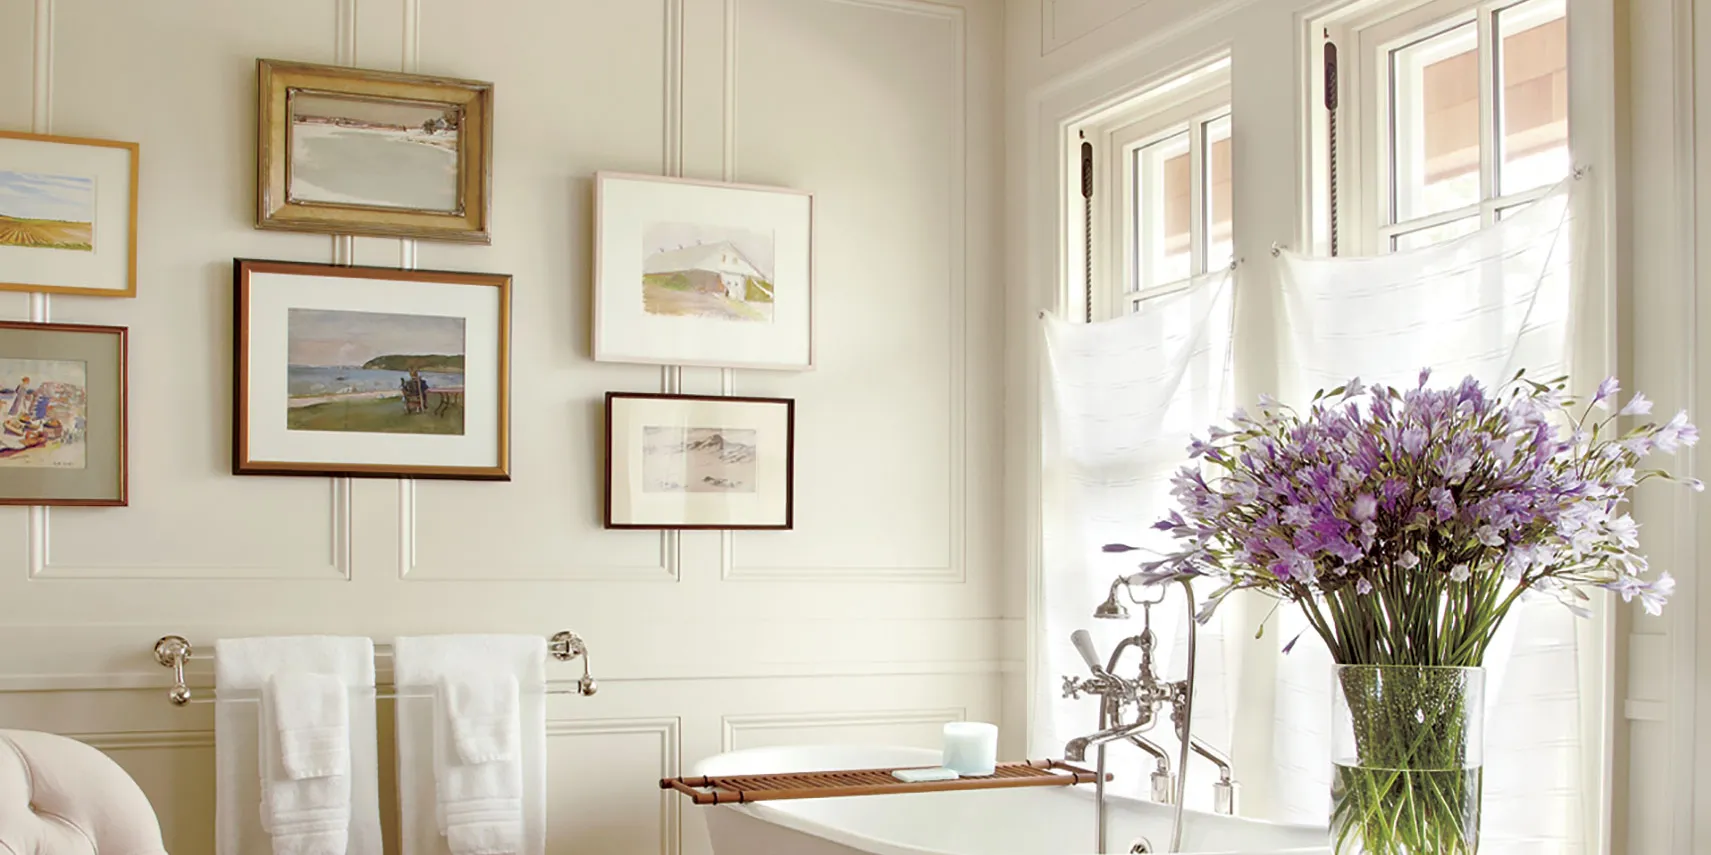 Is It Safe To Hang Wall Art In Your Bathroom?